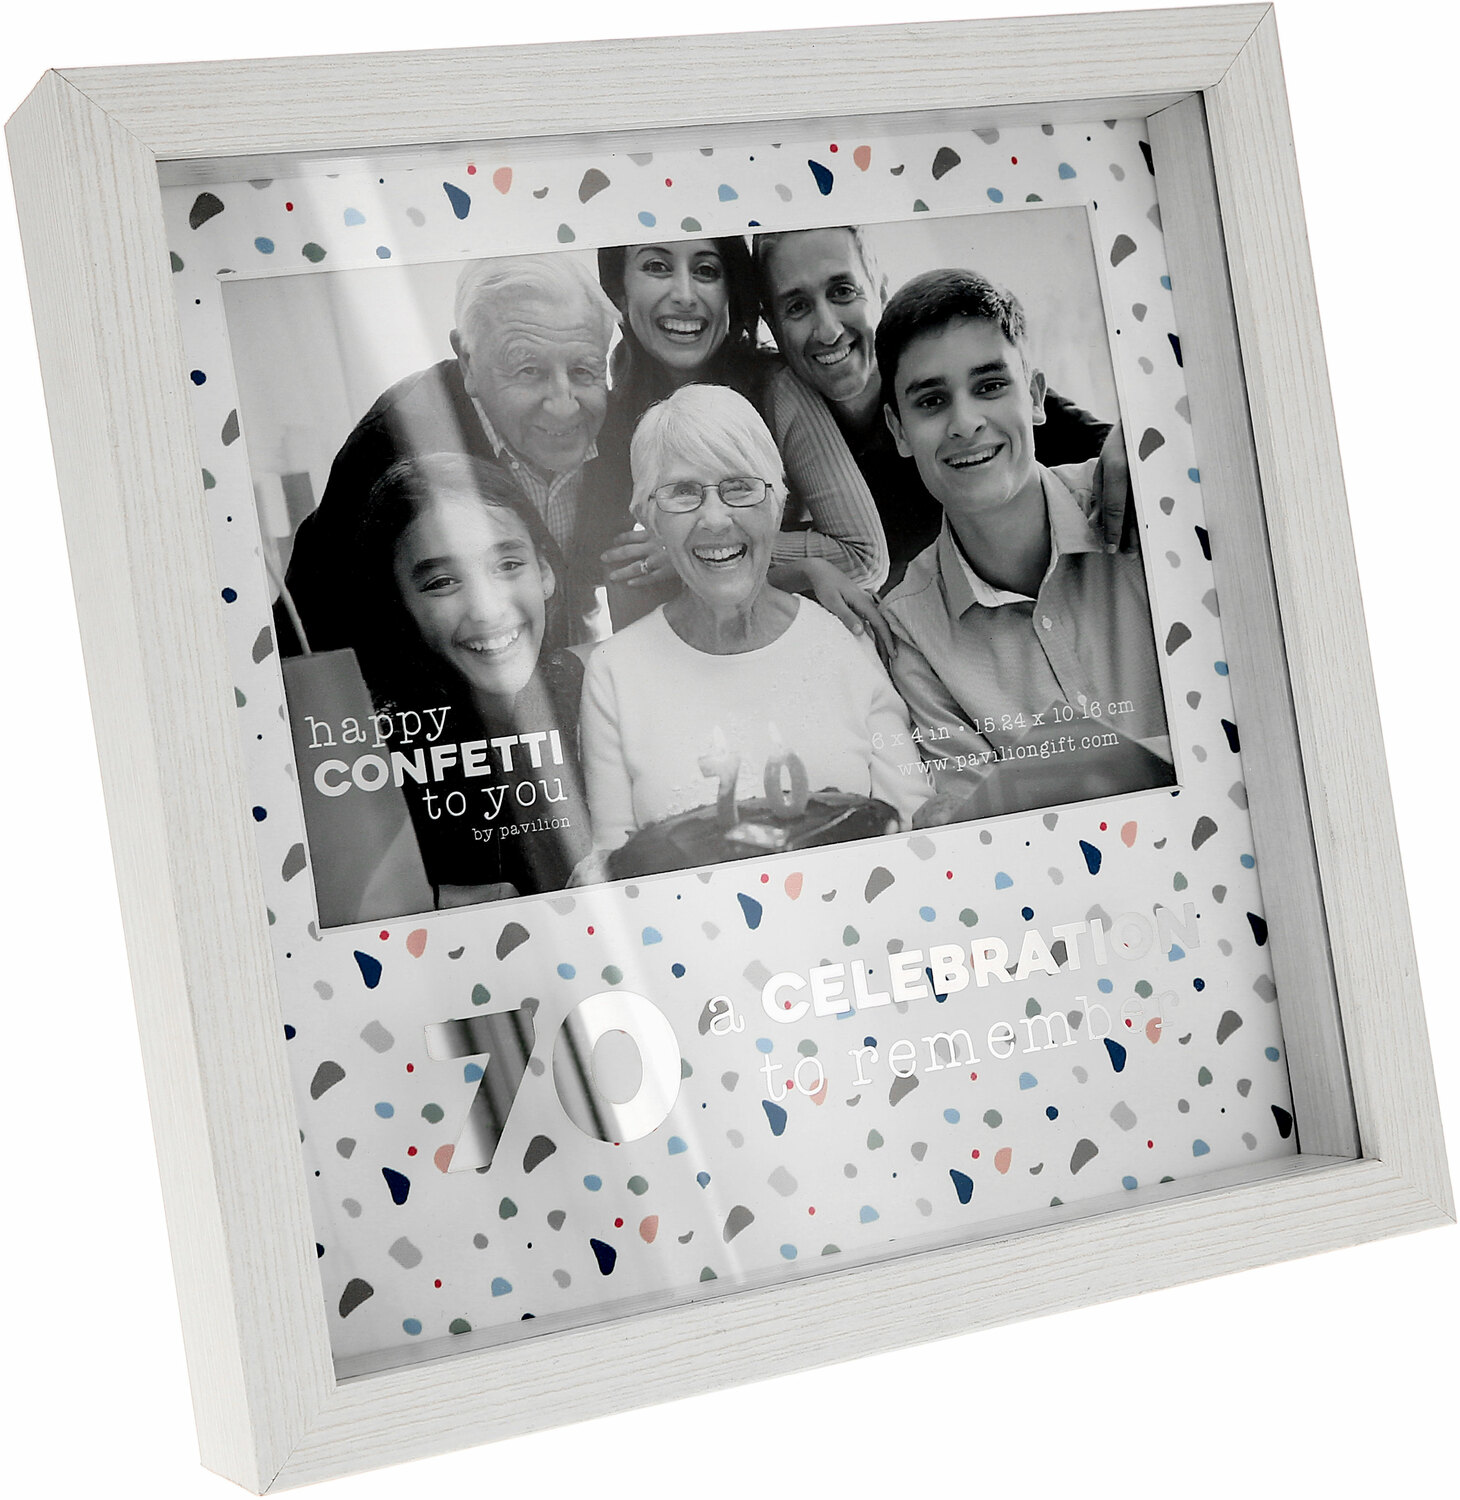 70 by Happy Confetti to You - 70 - 7.5" Shadow Box Frame
(Holds 6" x 4" Photo)